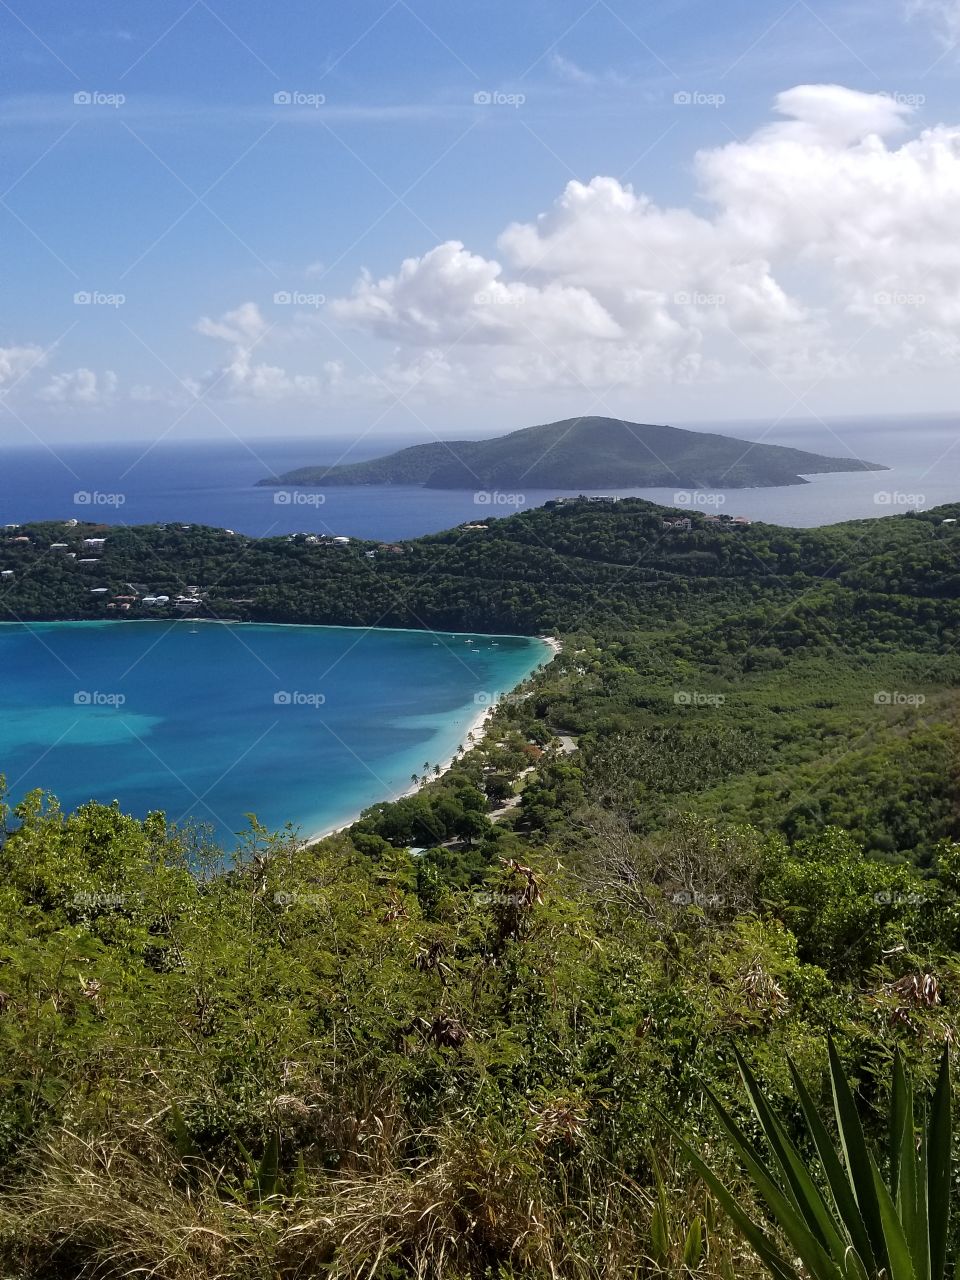 Beautiful picture of St Thomas island.